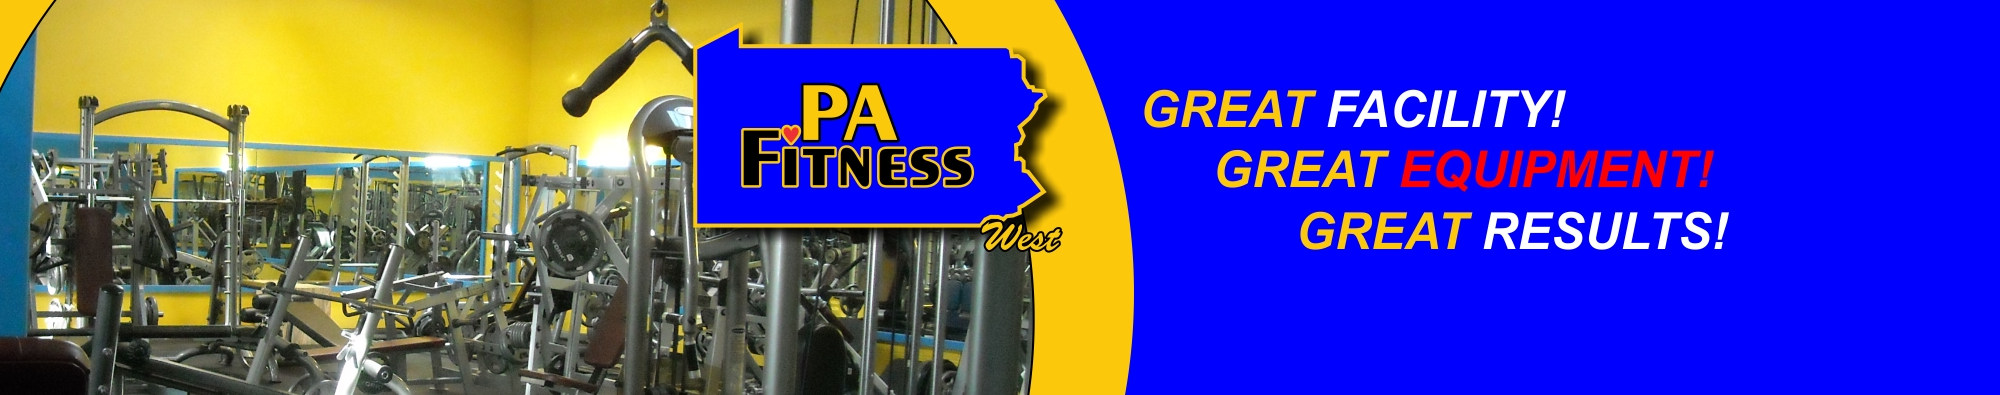 PA Fitness West Imperial PA 